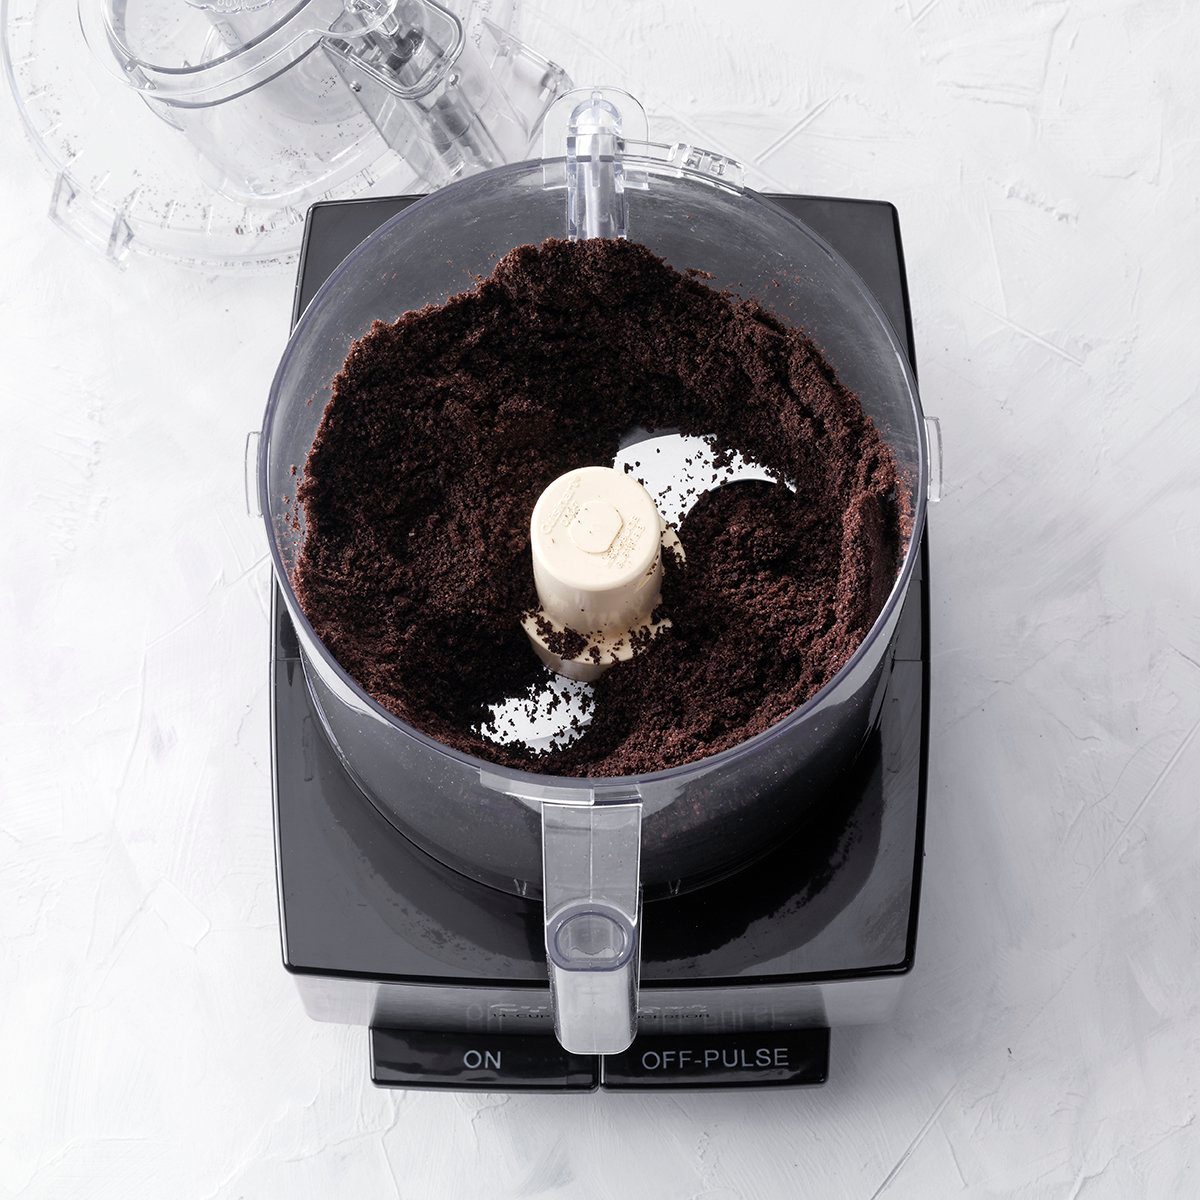 THGKH19, Food Processor for Oreo Cookie Crumbs